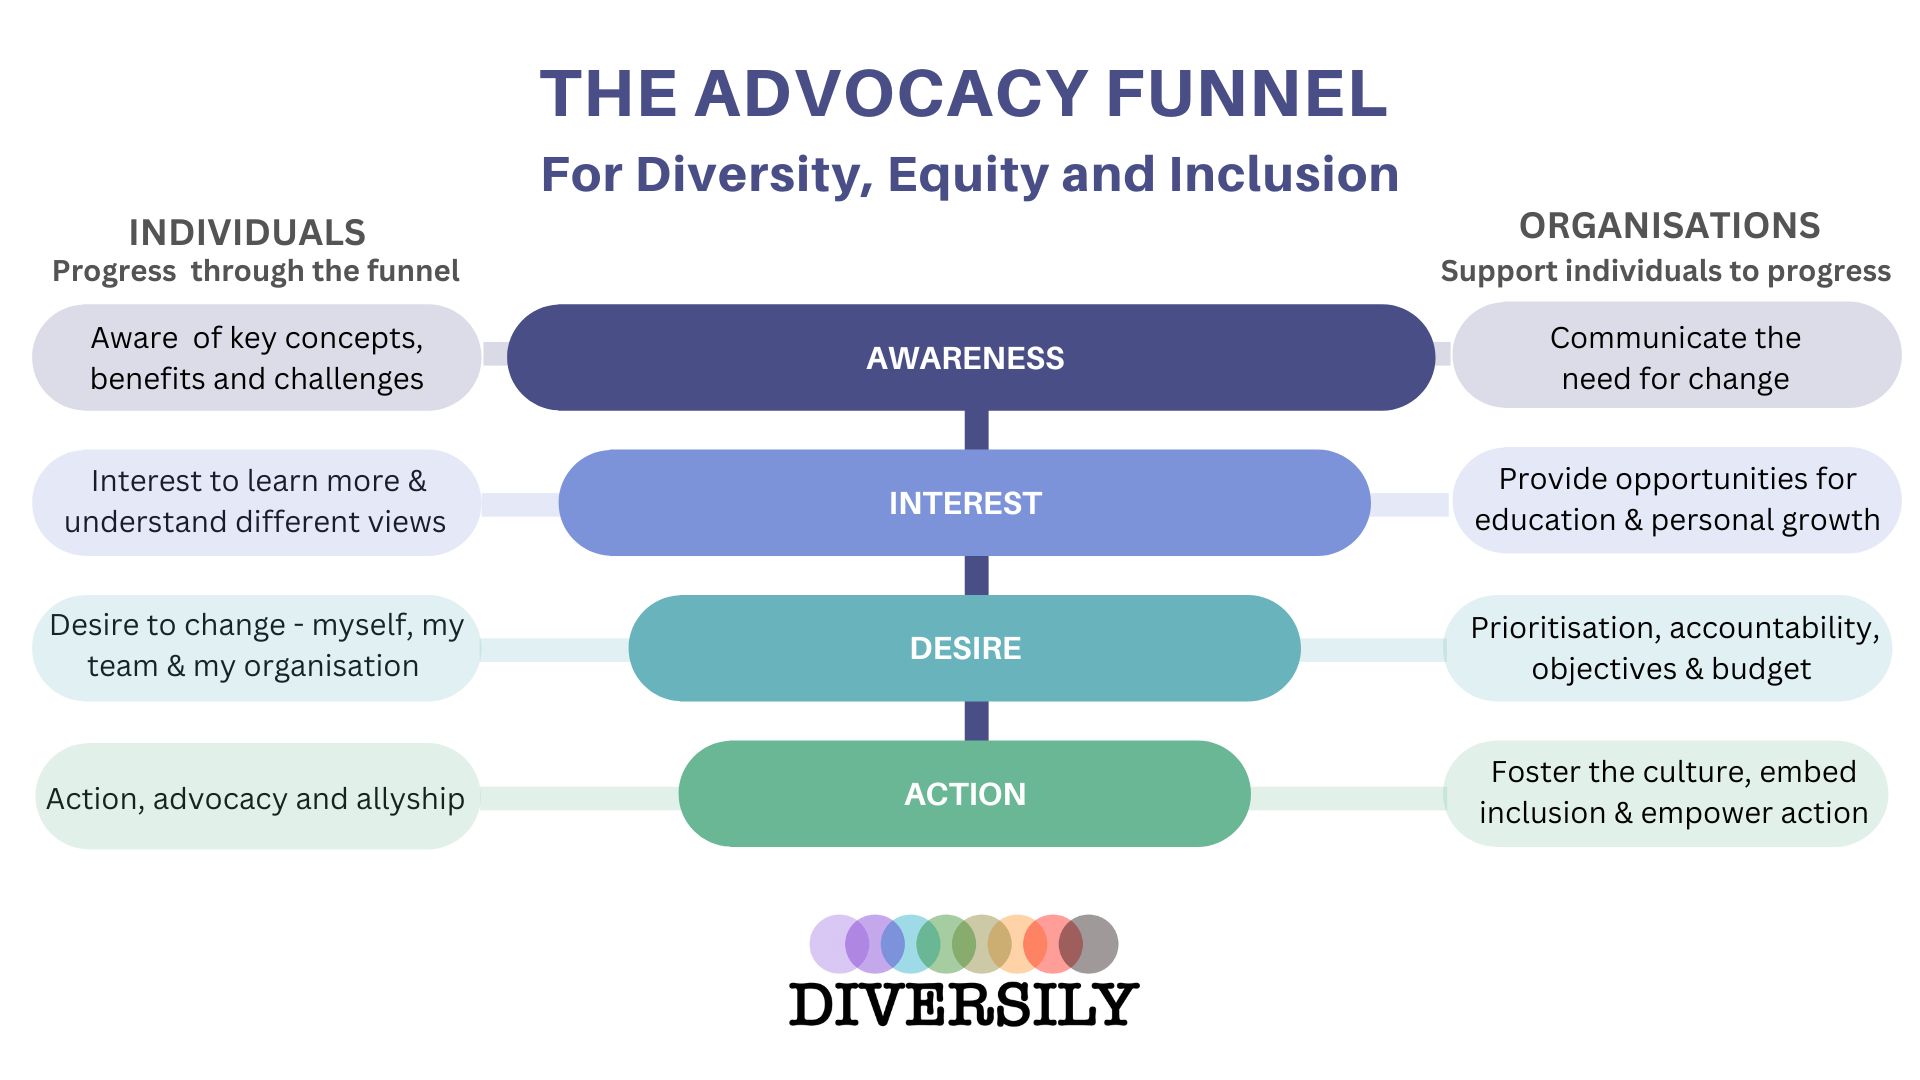 The advocacy funnel